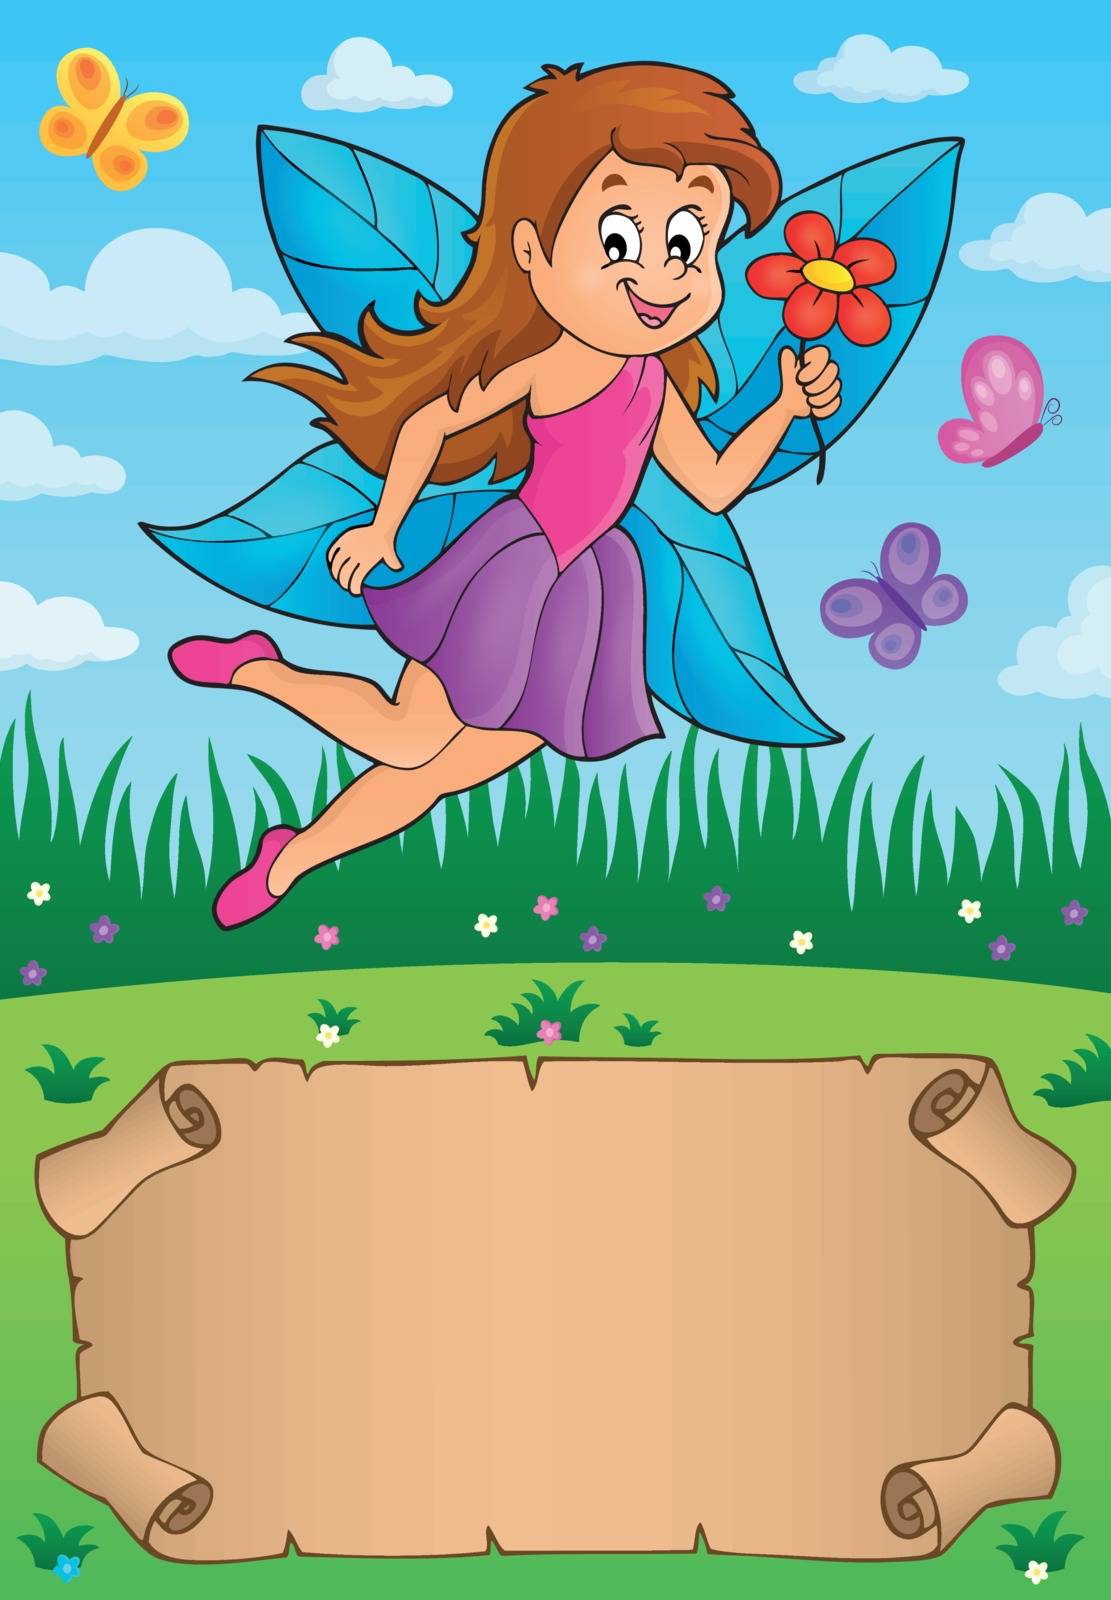 Small parchment with fairy - eps10 vector illustration.